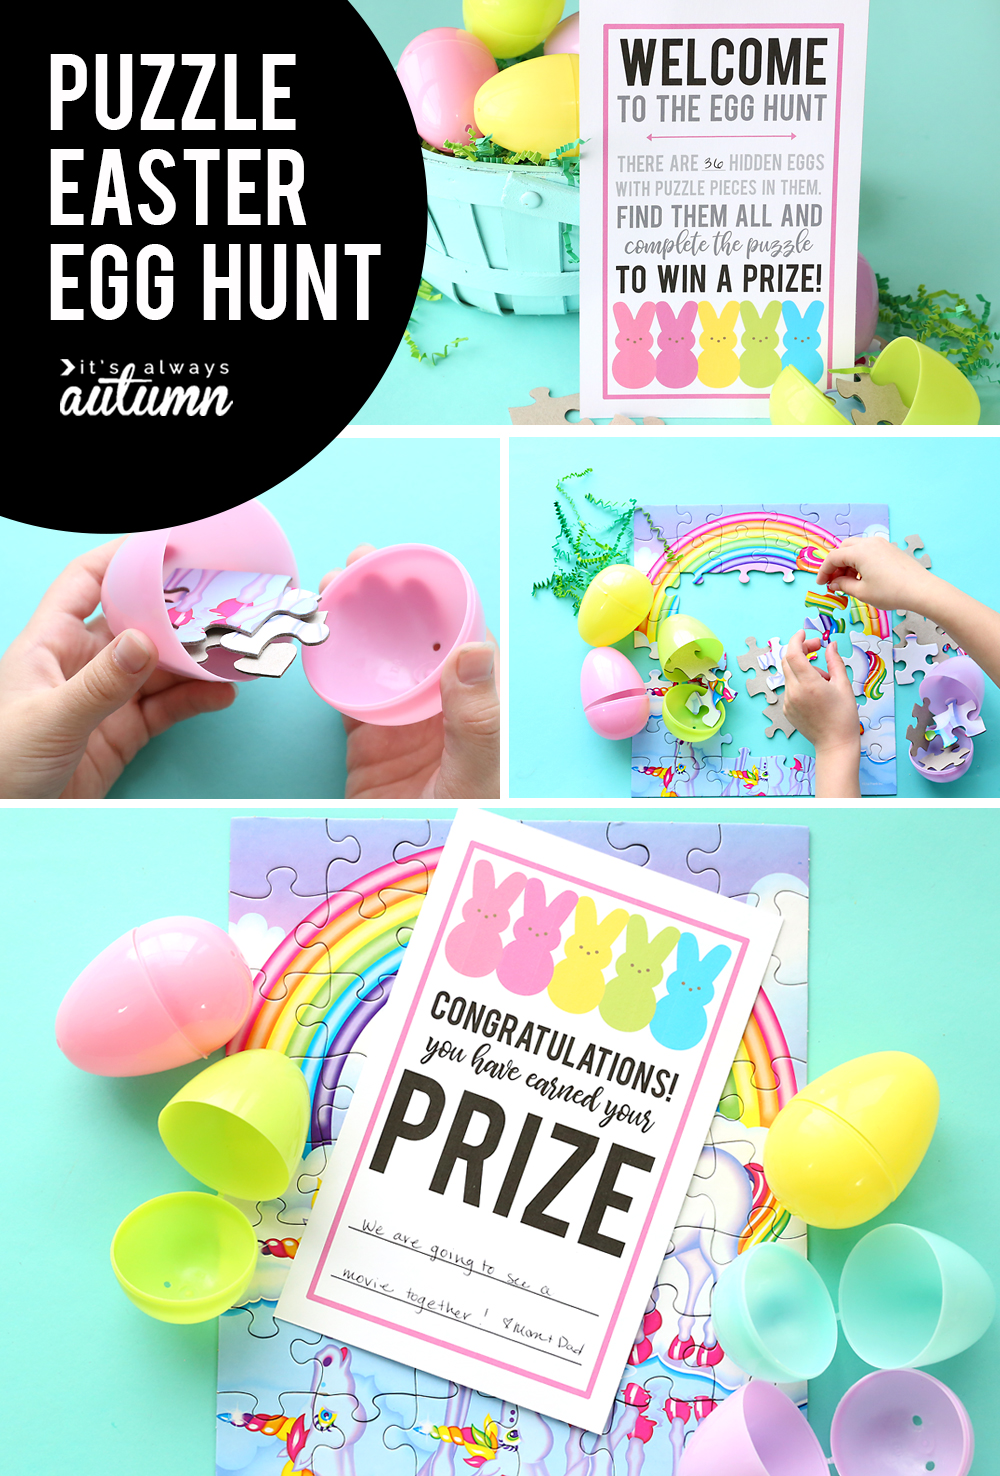 Puzzle Easter egg hunt printable instructions, kid finding puzzle pieces in eggs, hands putting together puzzle to receive prize